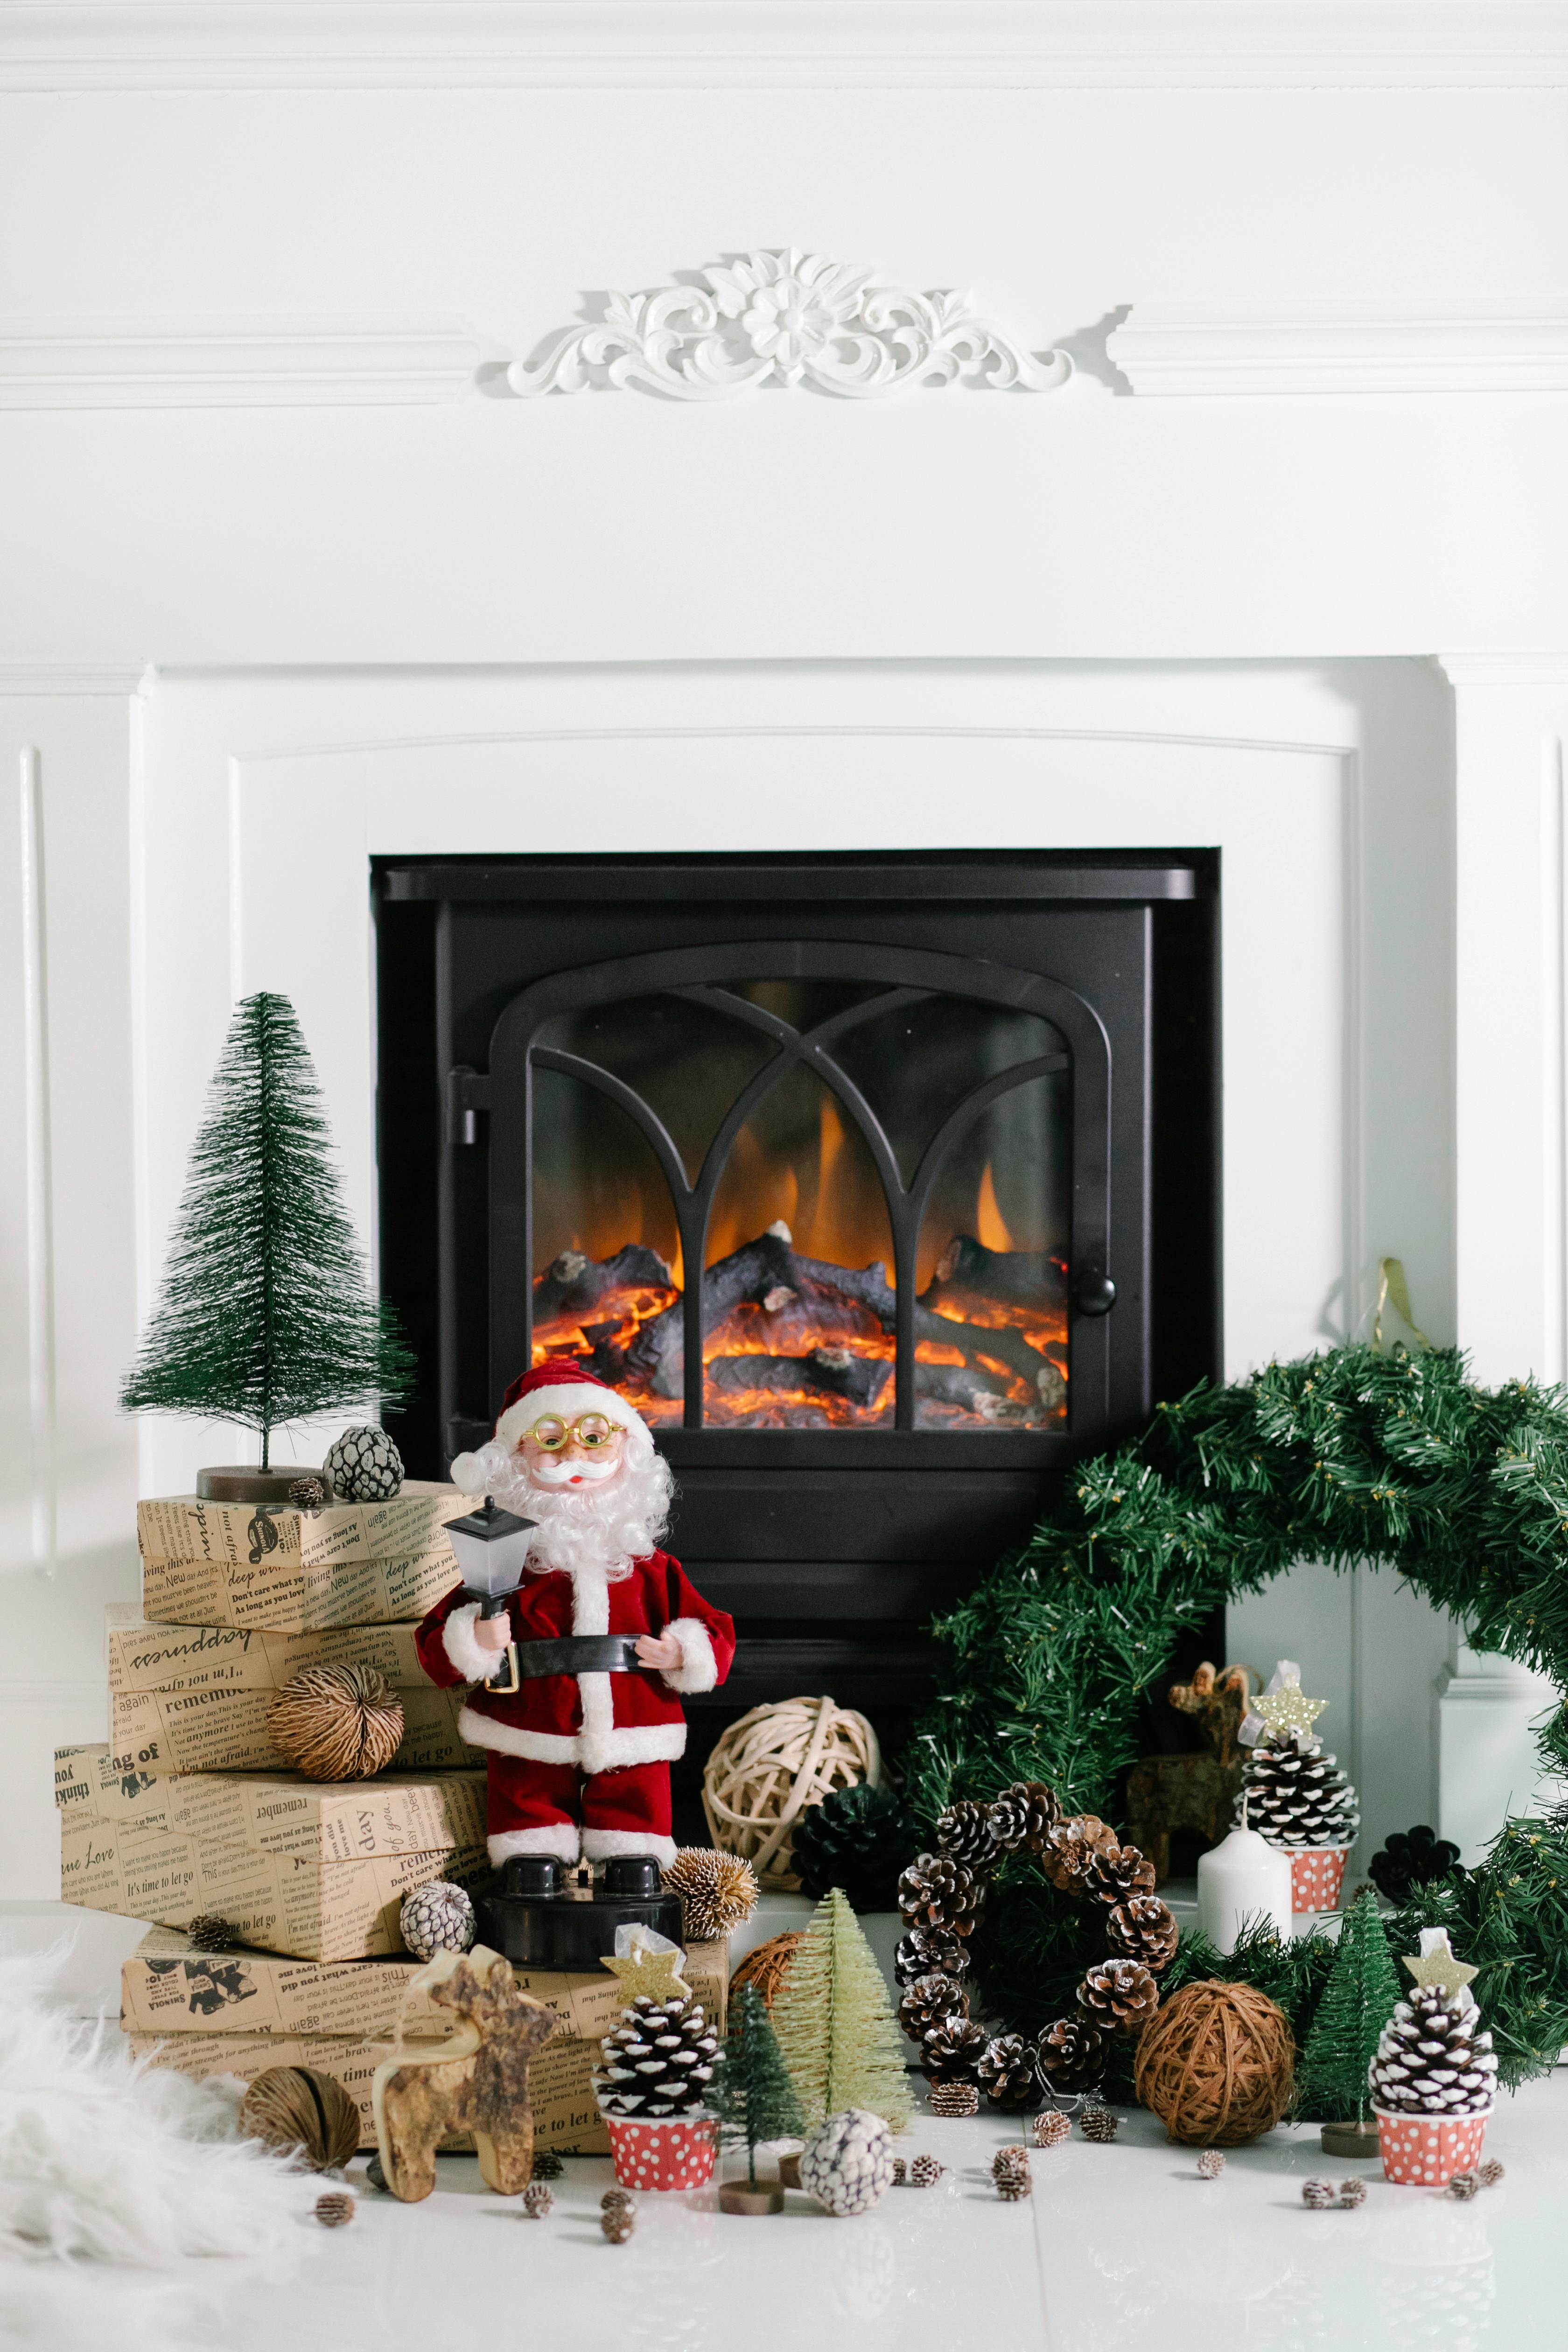 Download wallpaper 1440x900 window fireplace candles christmas tree cozy  christmas widescreen 1610 hd background